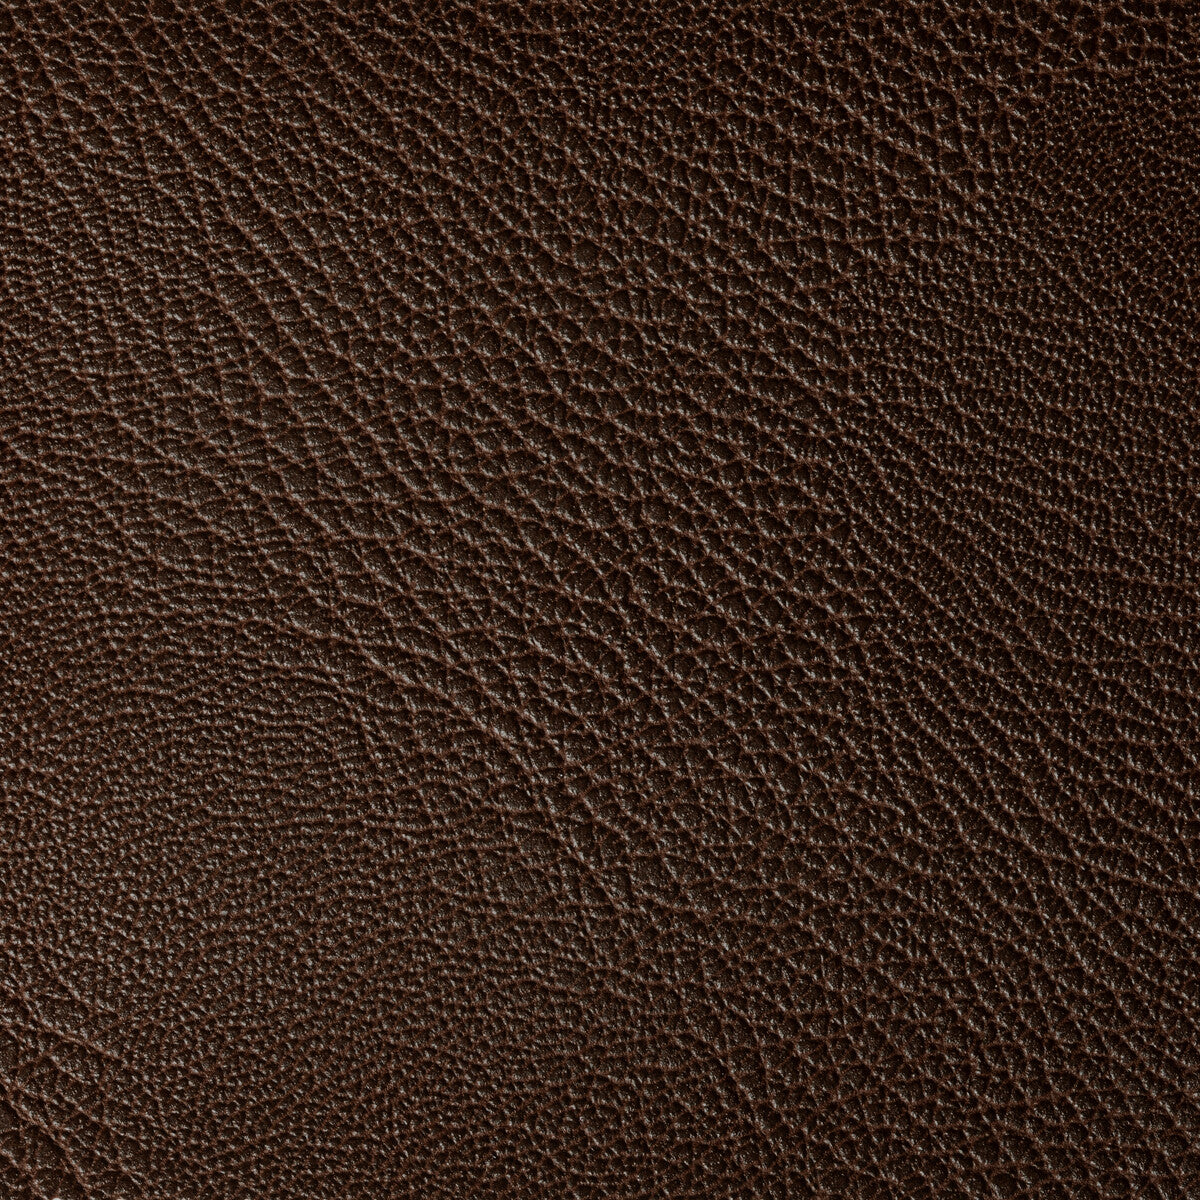 Rustler fabric in bark color - pattern RUSTLER.6.0 - by Kravet Contract in the Foundations / Value collection